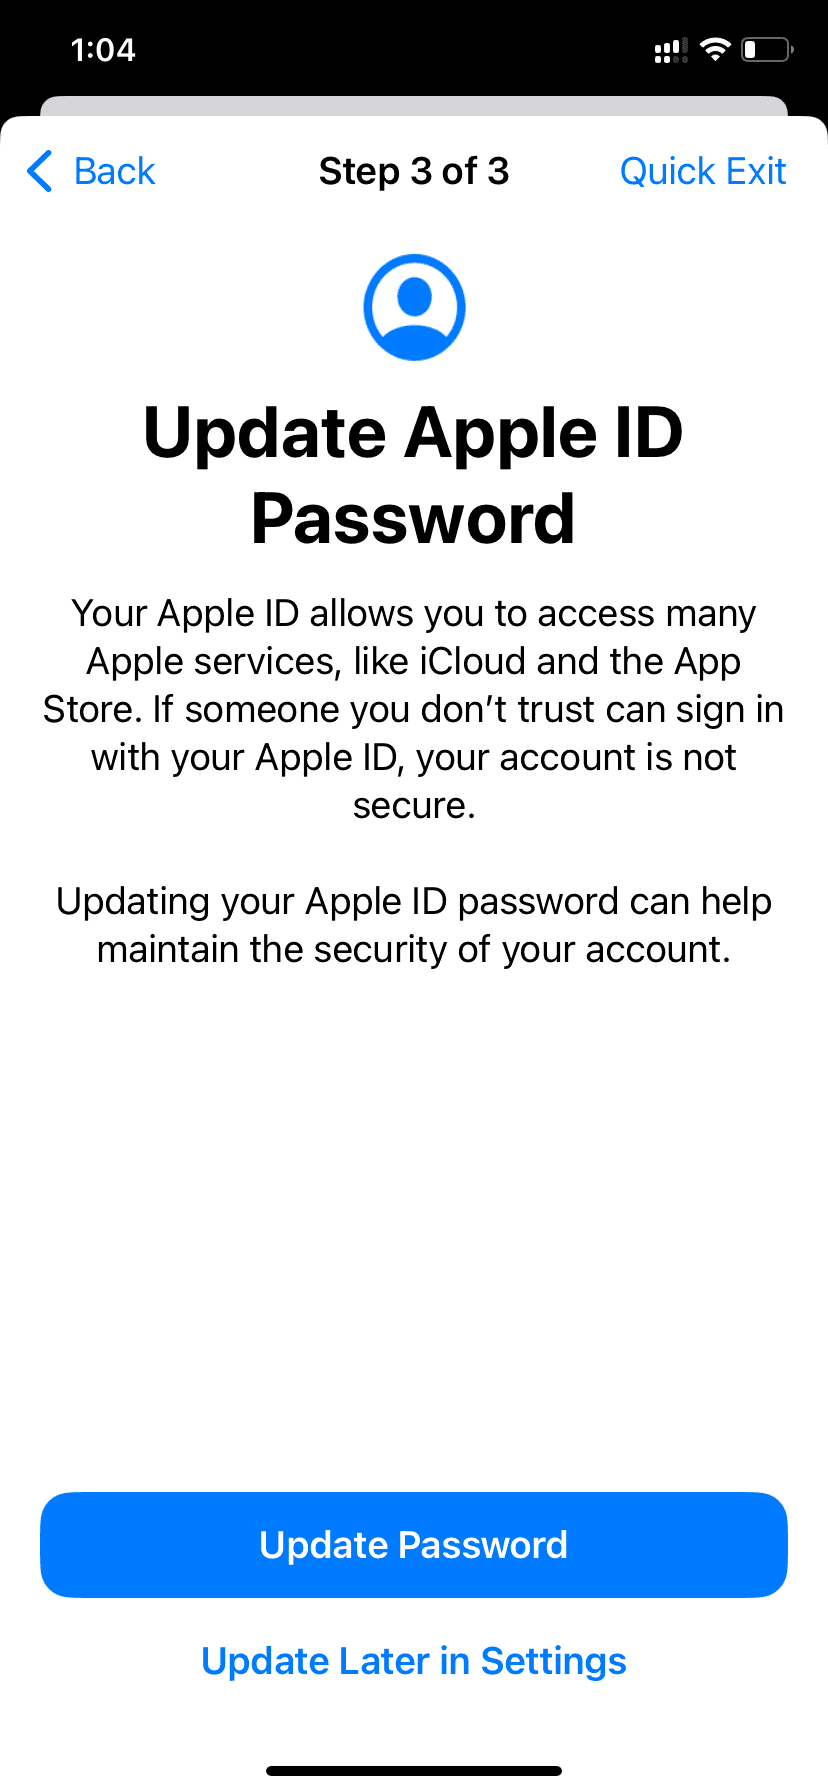 Update Apple ID Password to prevent unwanted access in Safety Check in iOS 16